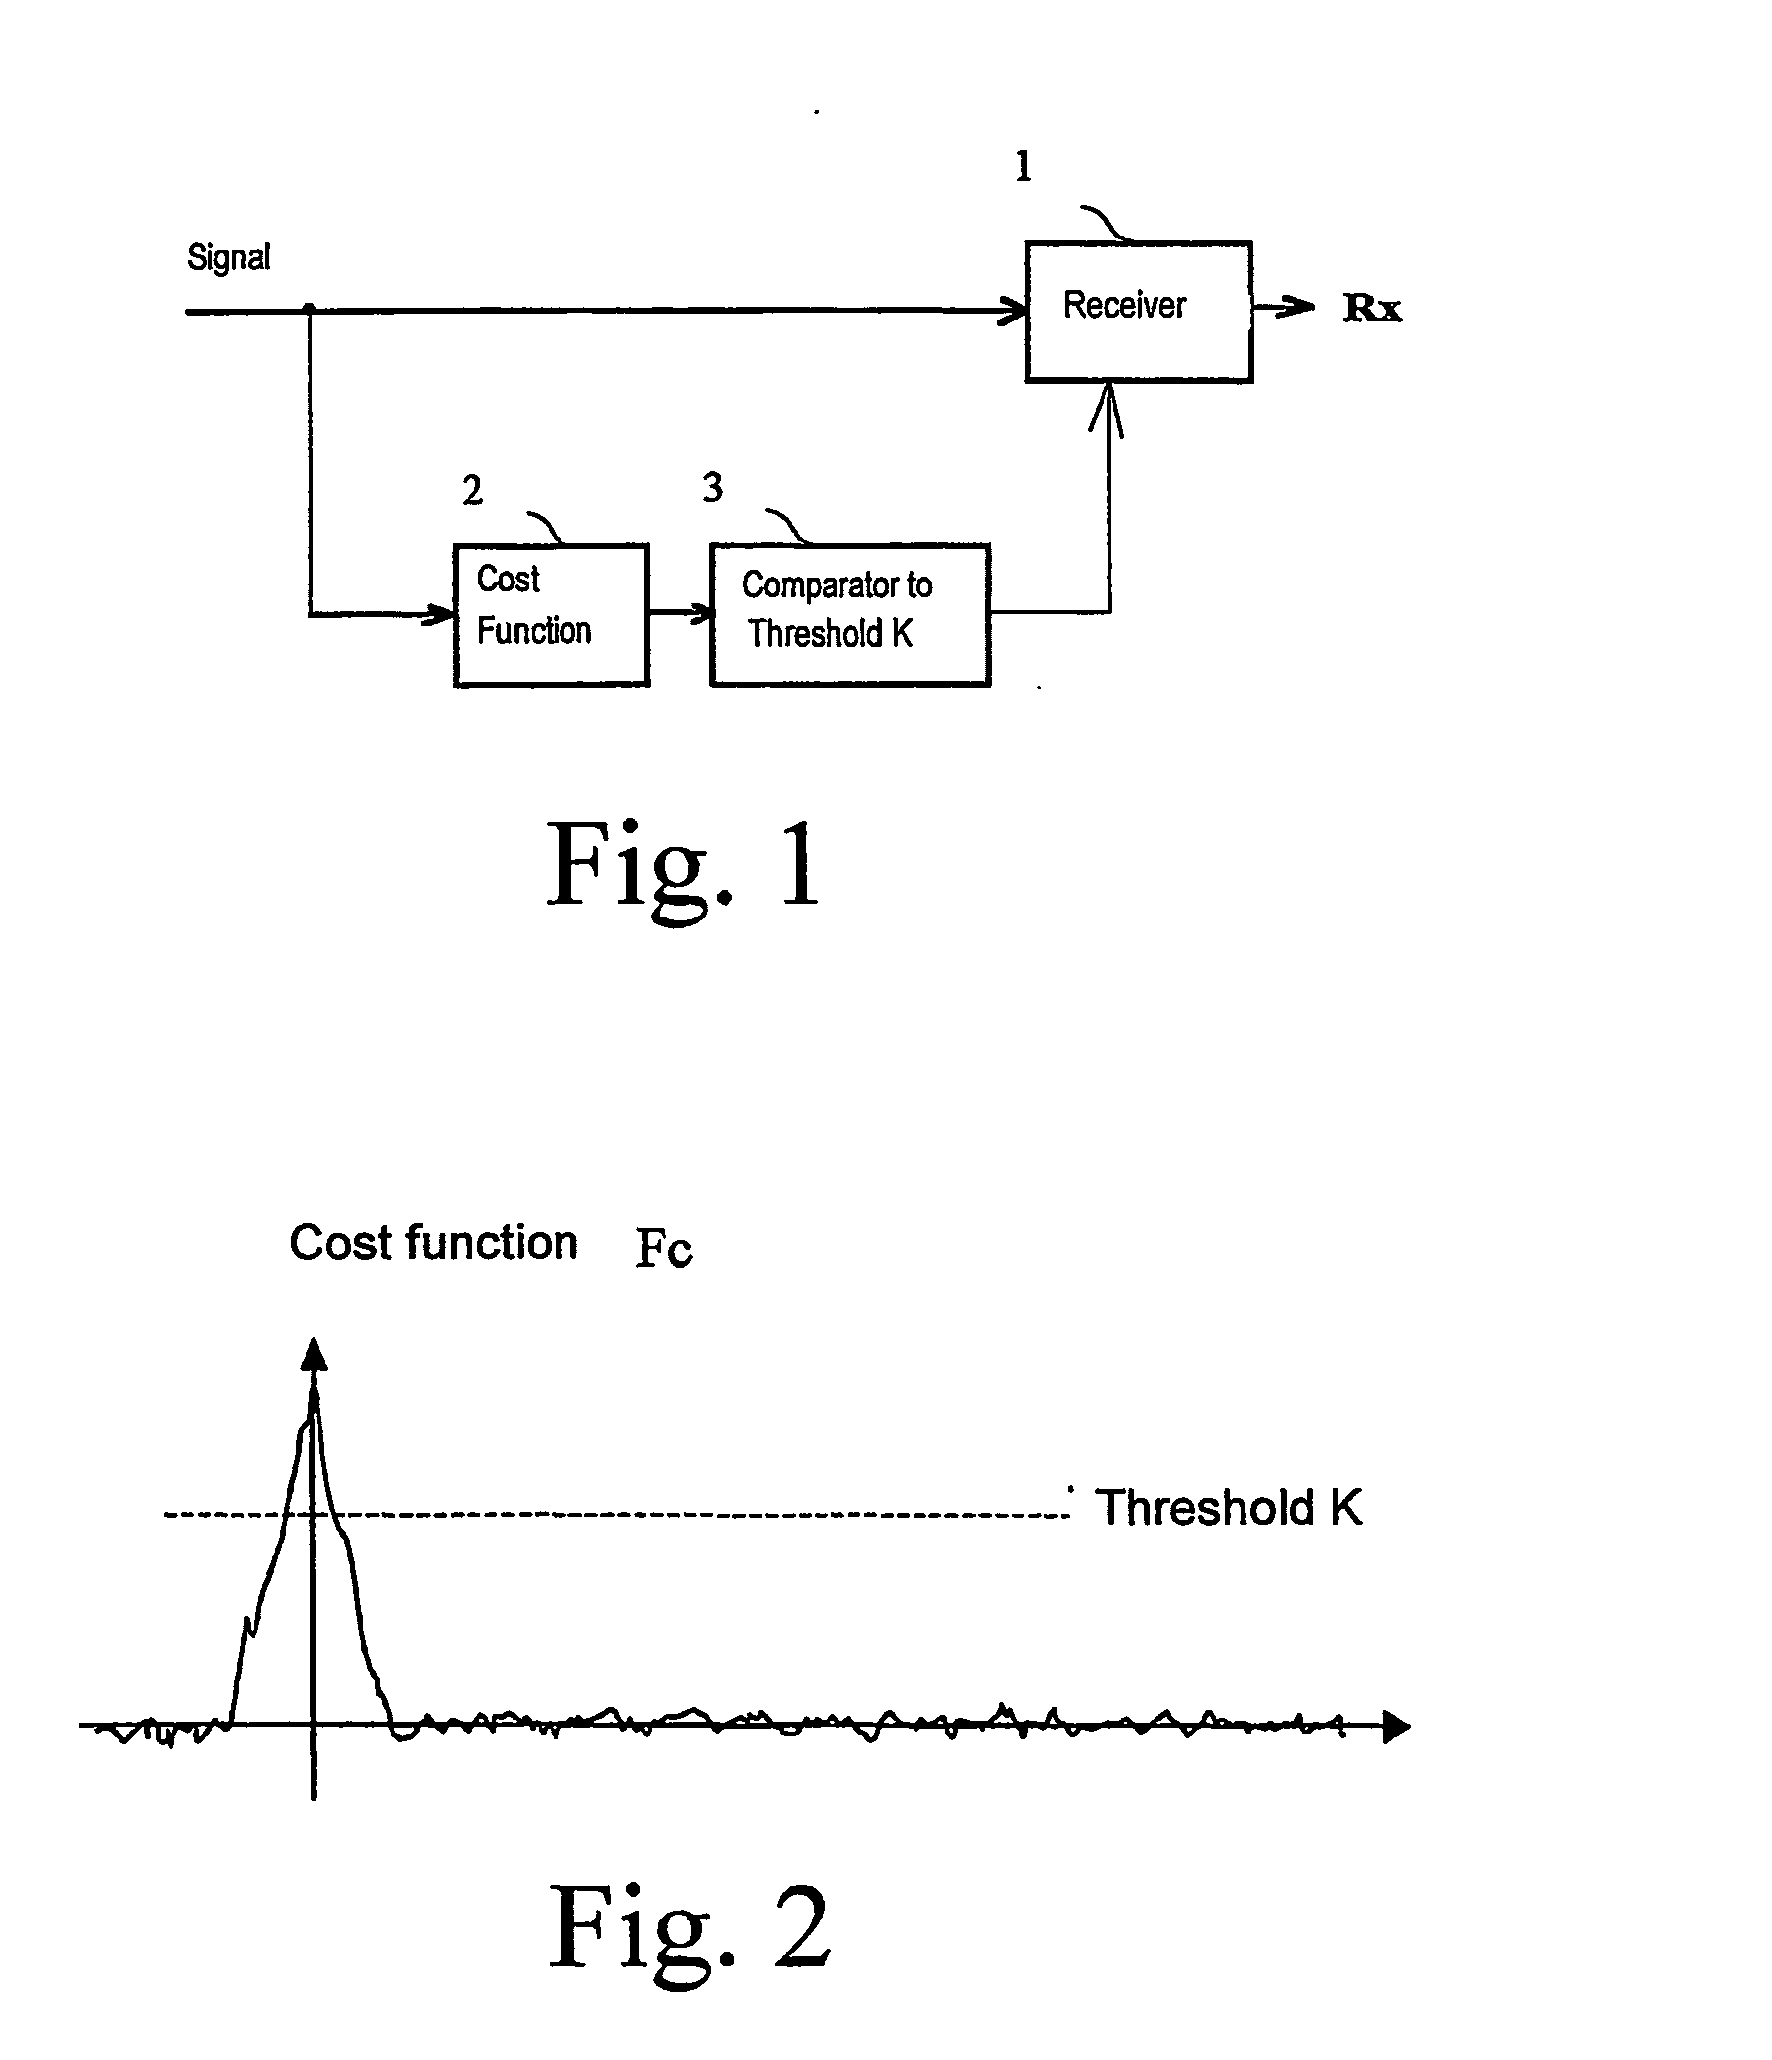 Method and System for Controlling a Receiver In a Digital Communication System